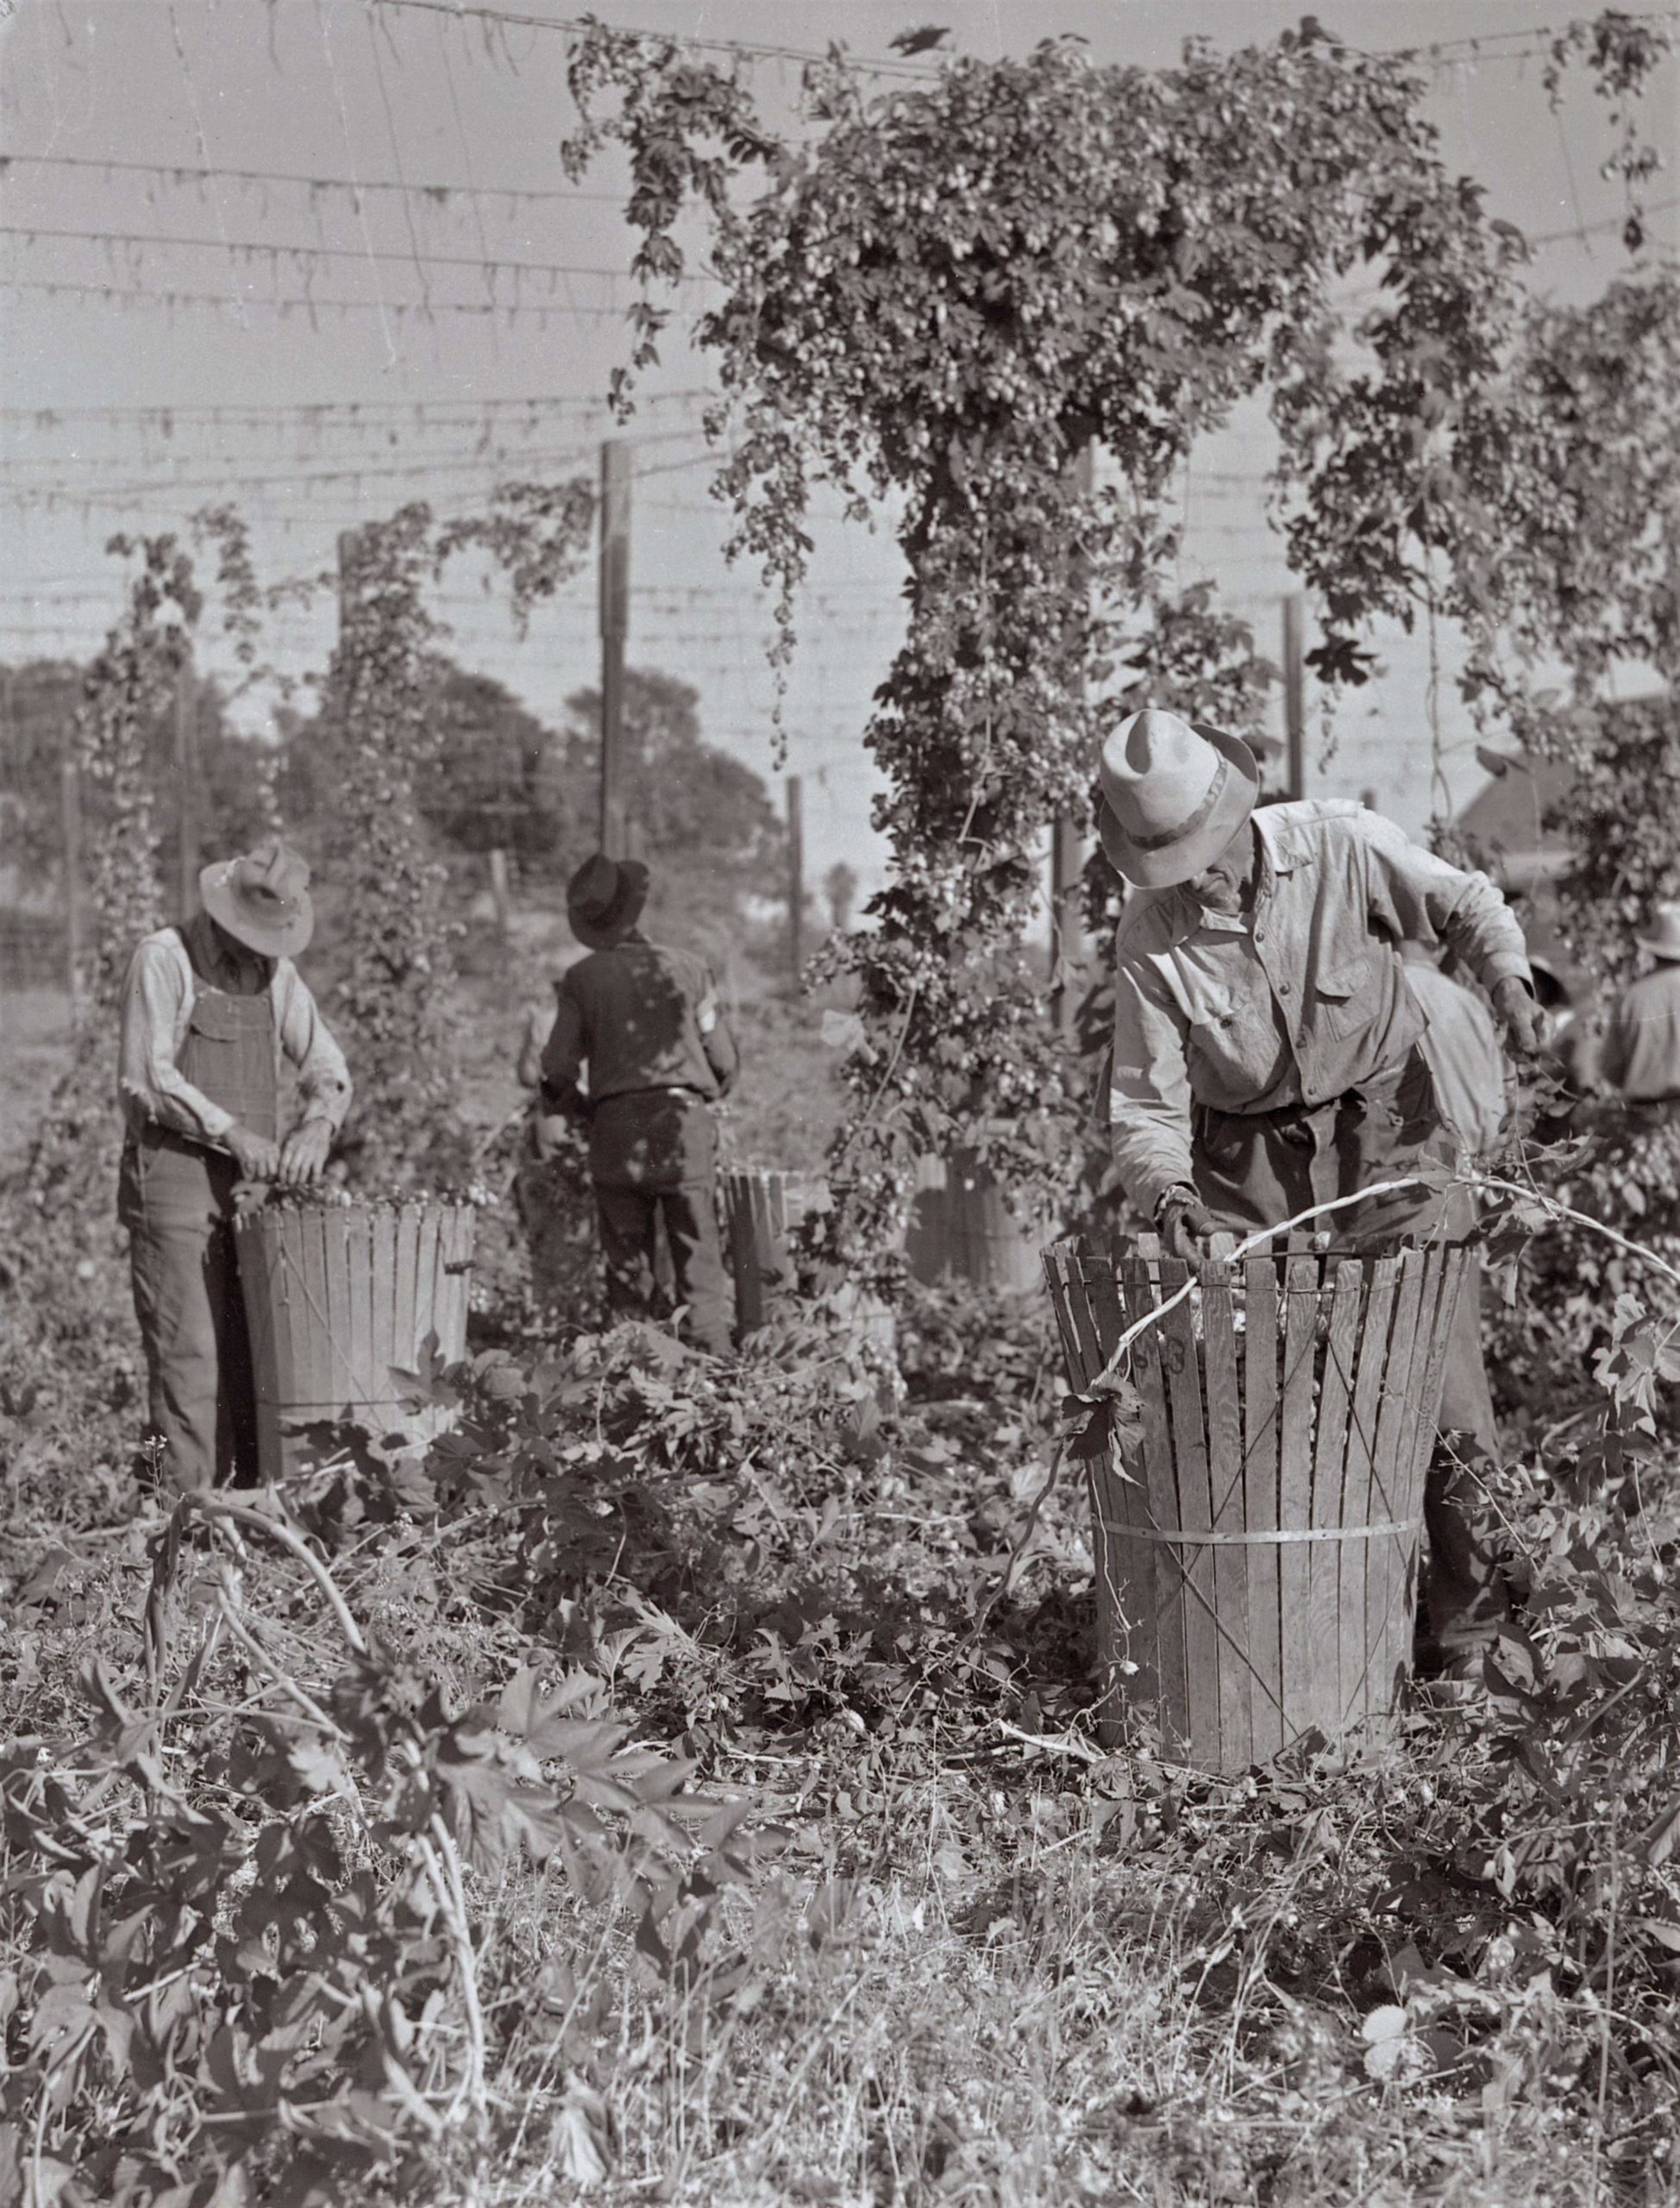 Stripping the hop vines near Wohler Road in Healdsburg in the 1920s. (SONOMA COUNTY LIBRARY)